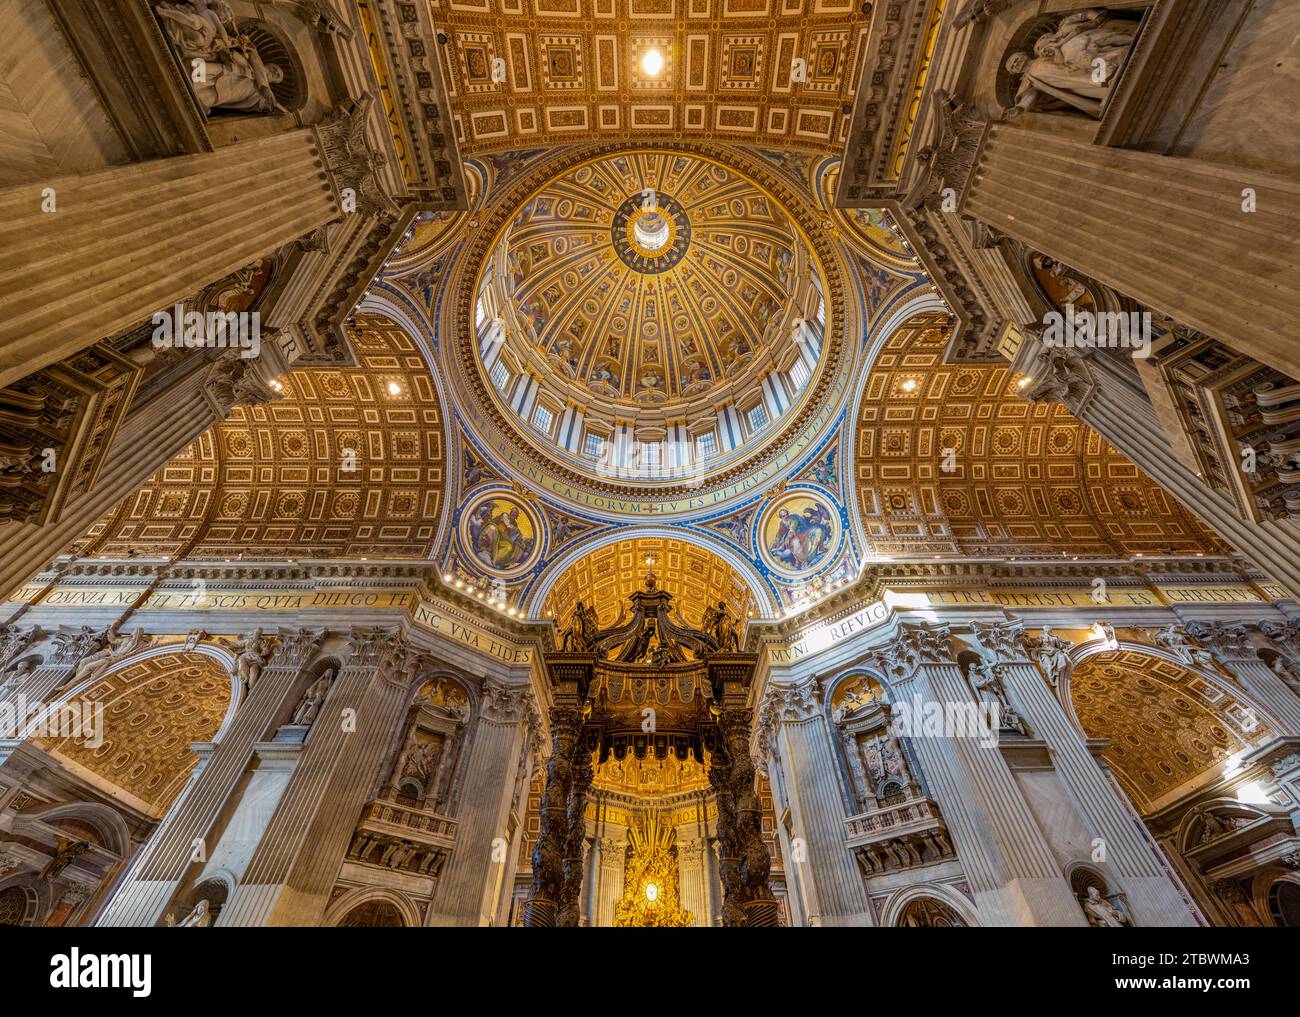 A picture of the huge dome of the St. Peter's Basilica, the altar and the surrounding frescoes and architecture as seen from the inside Stock Photo